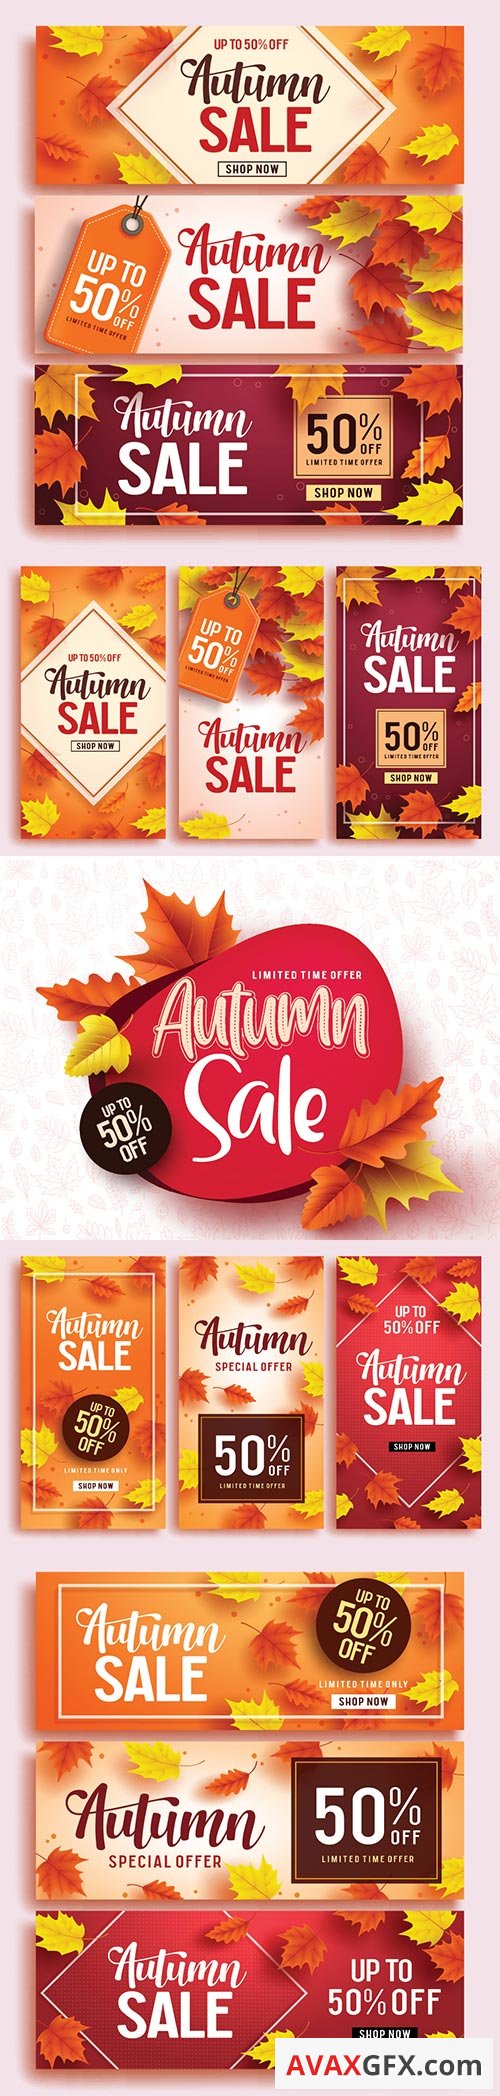 Autumn sale vector banner set template with colorful maple leaves background